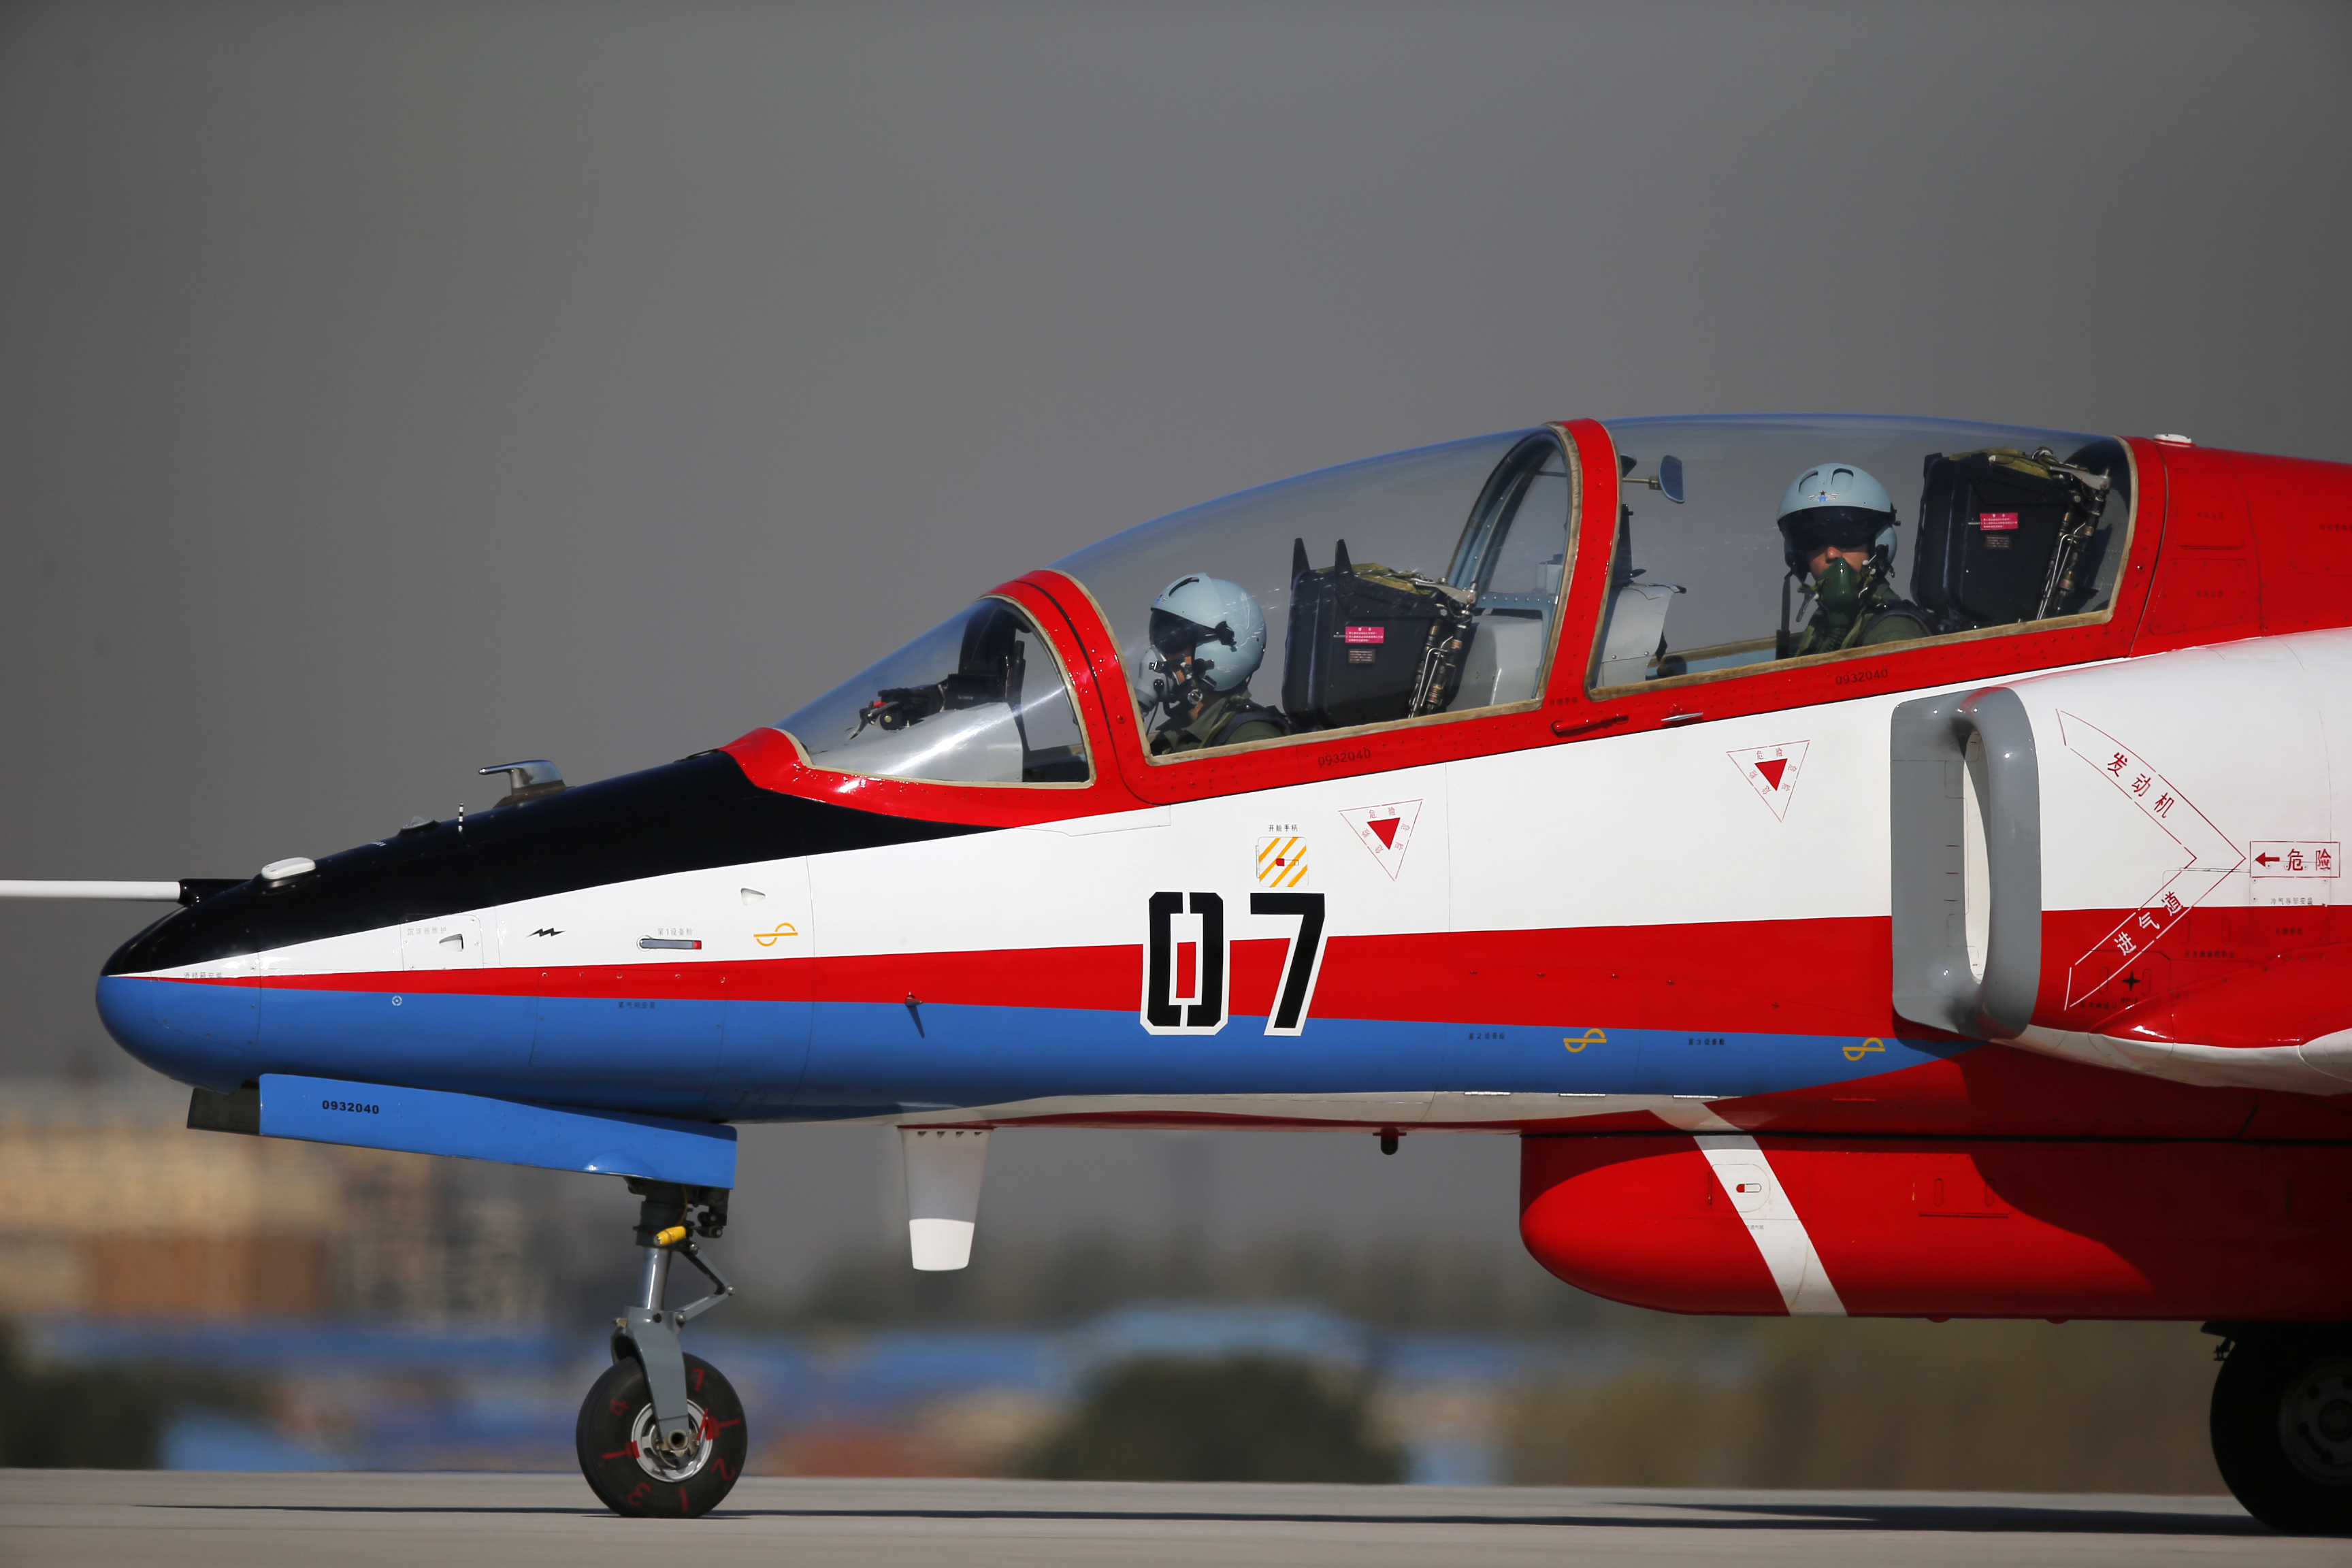 China Air Force Airplane People Pilot 3456x2304